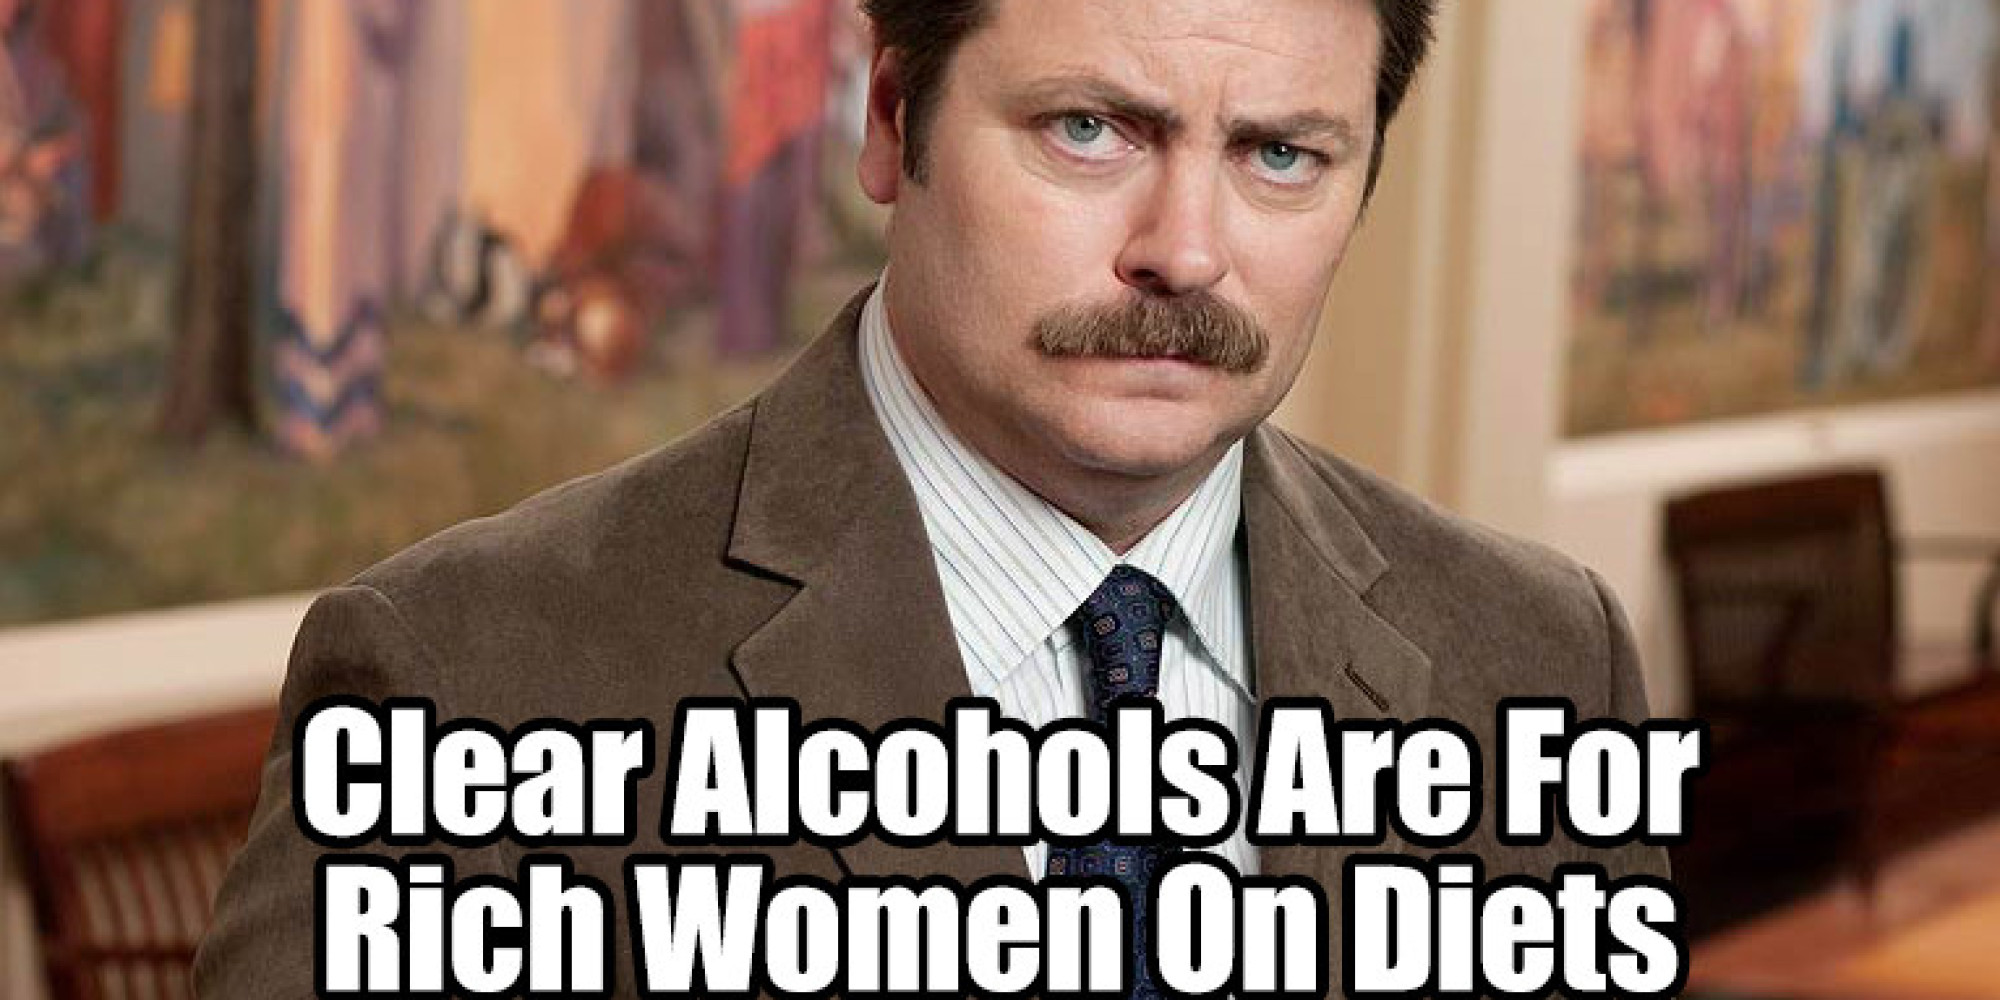 tv show, parks and recreation, ron swanson